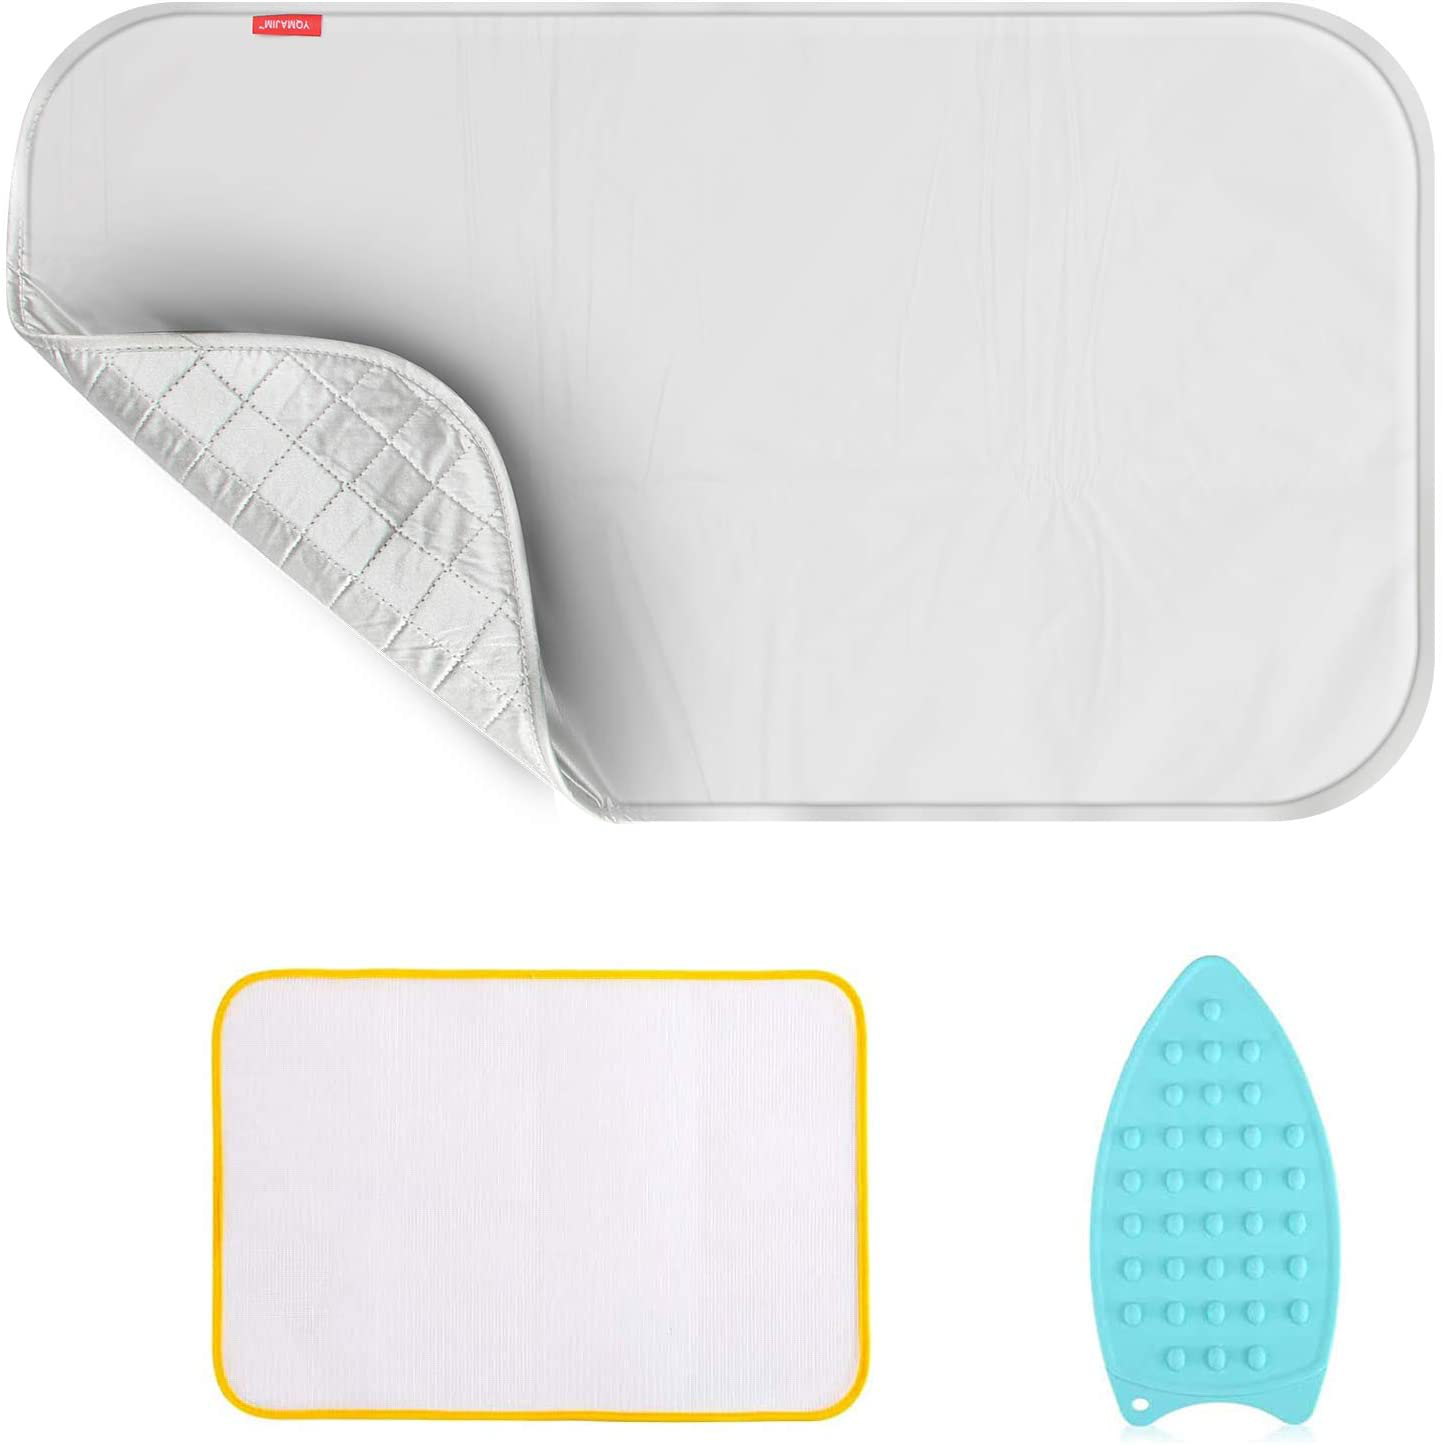 Upgraded Thick Ironing Mat,Travel Ironing Blanket Ironing Pad,Portable Double-Side Using,Heat Resistant Pad Cover for Washer,Dryer,Table Top,Countertop,Ironing Board for Small Space (22 x 47 inch)